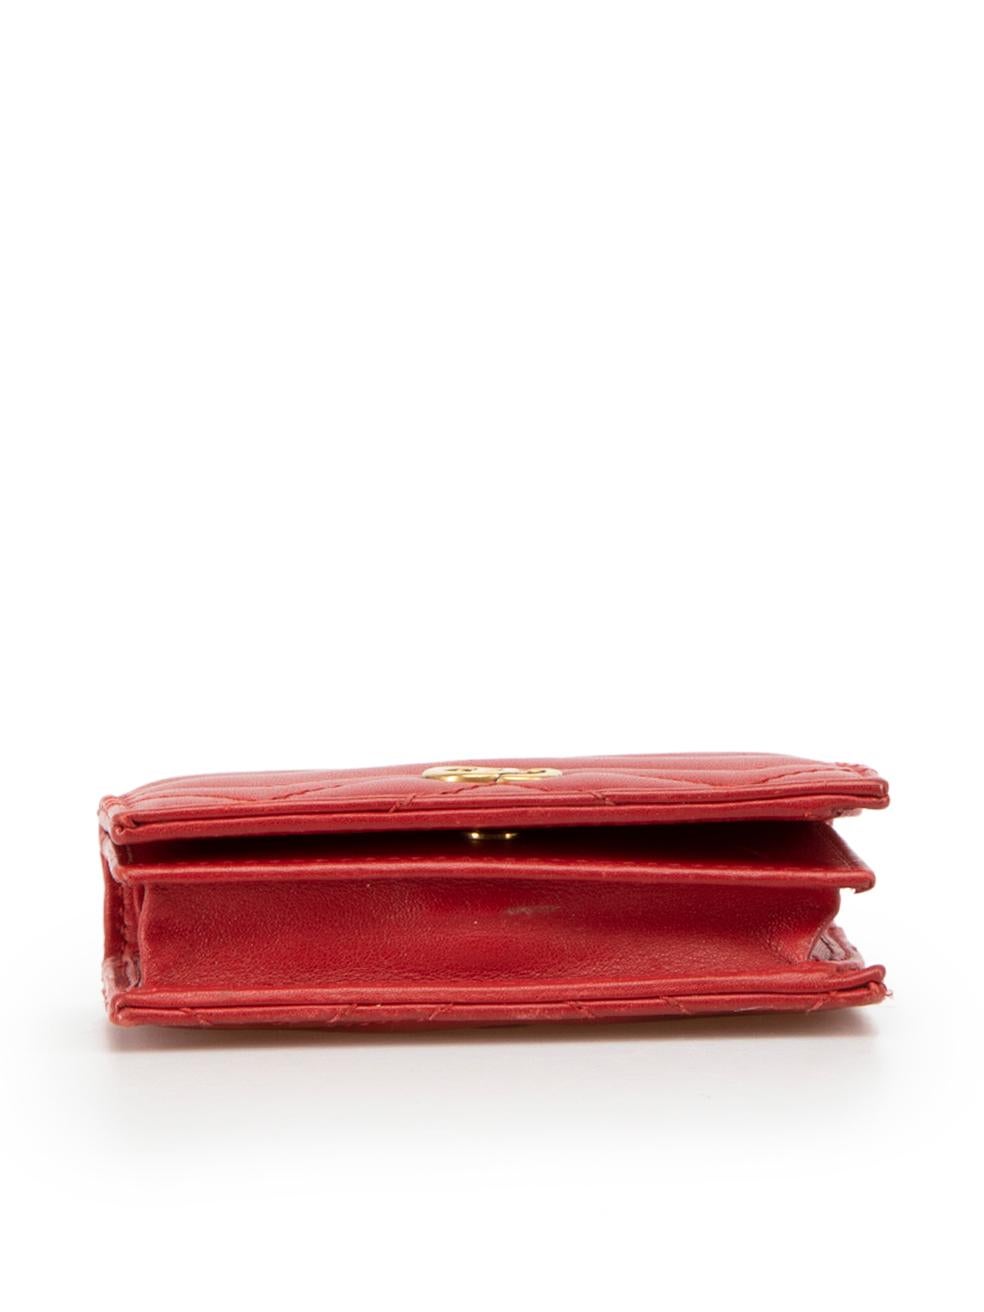 Gucci Women's Red Leather GG Marmont Matelasse Wallet 1